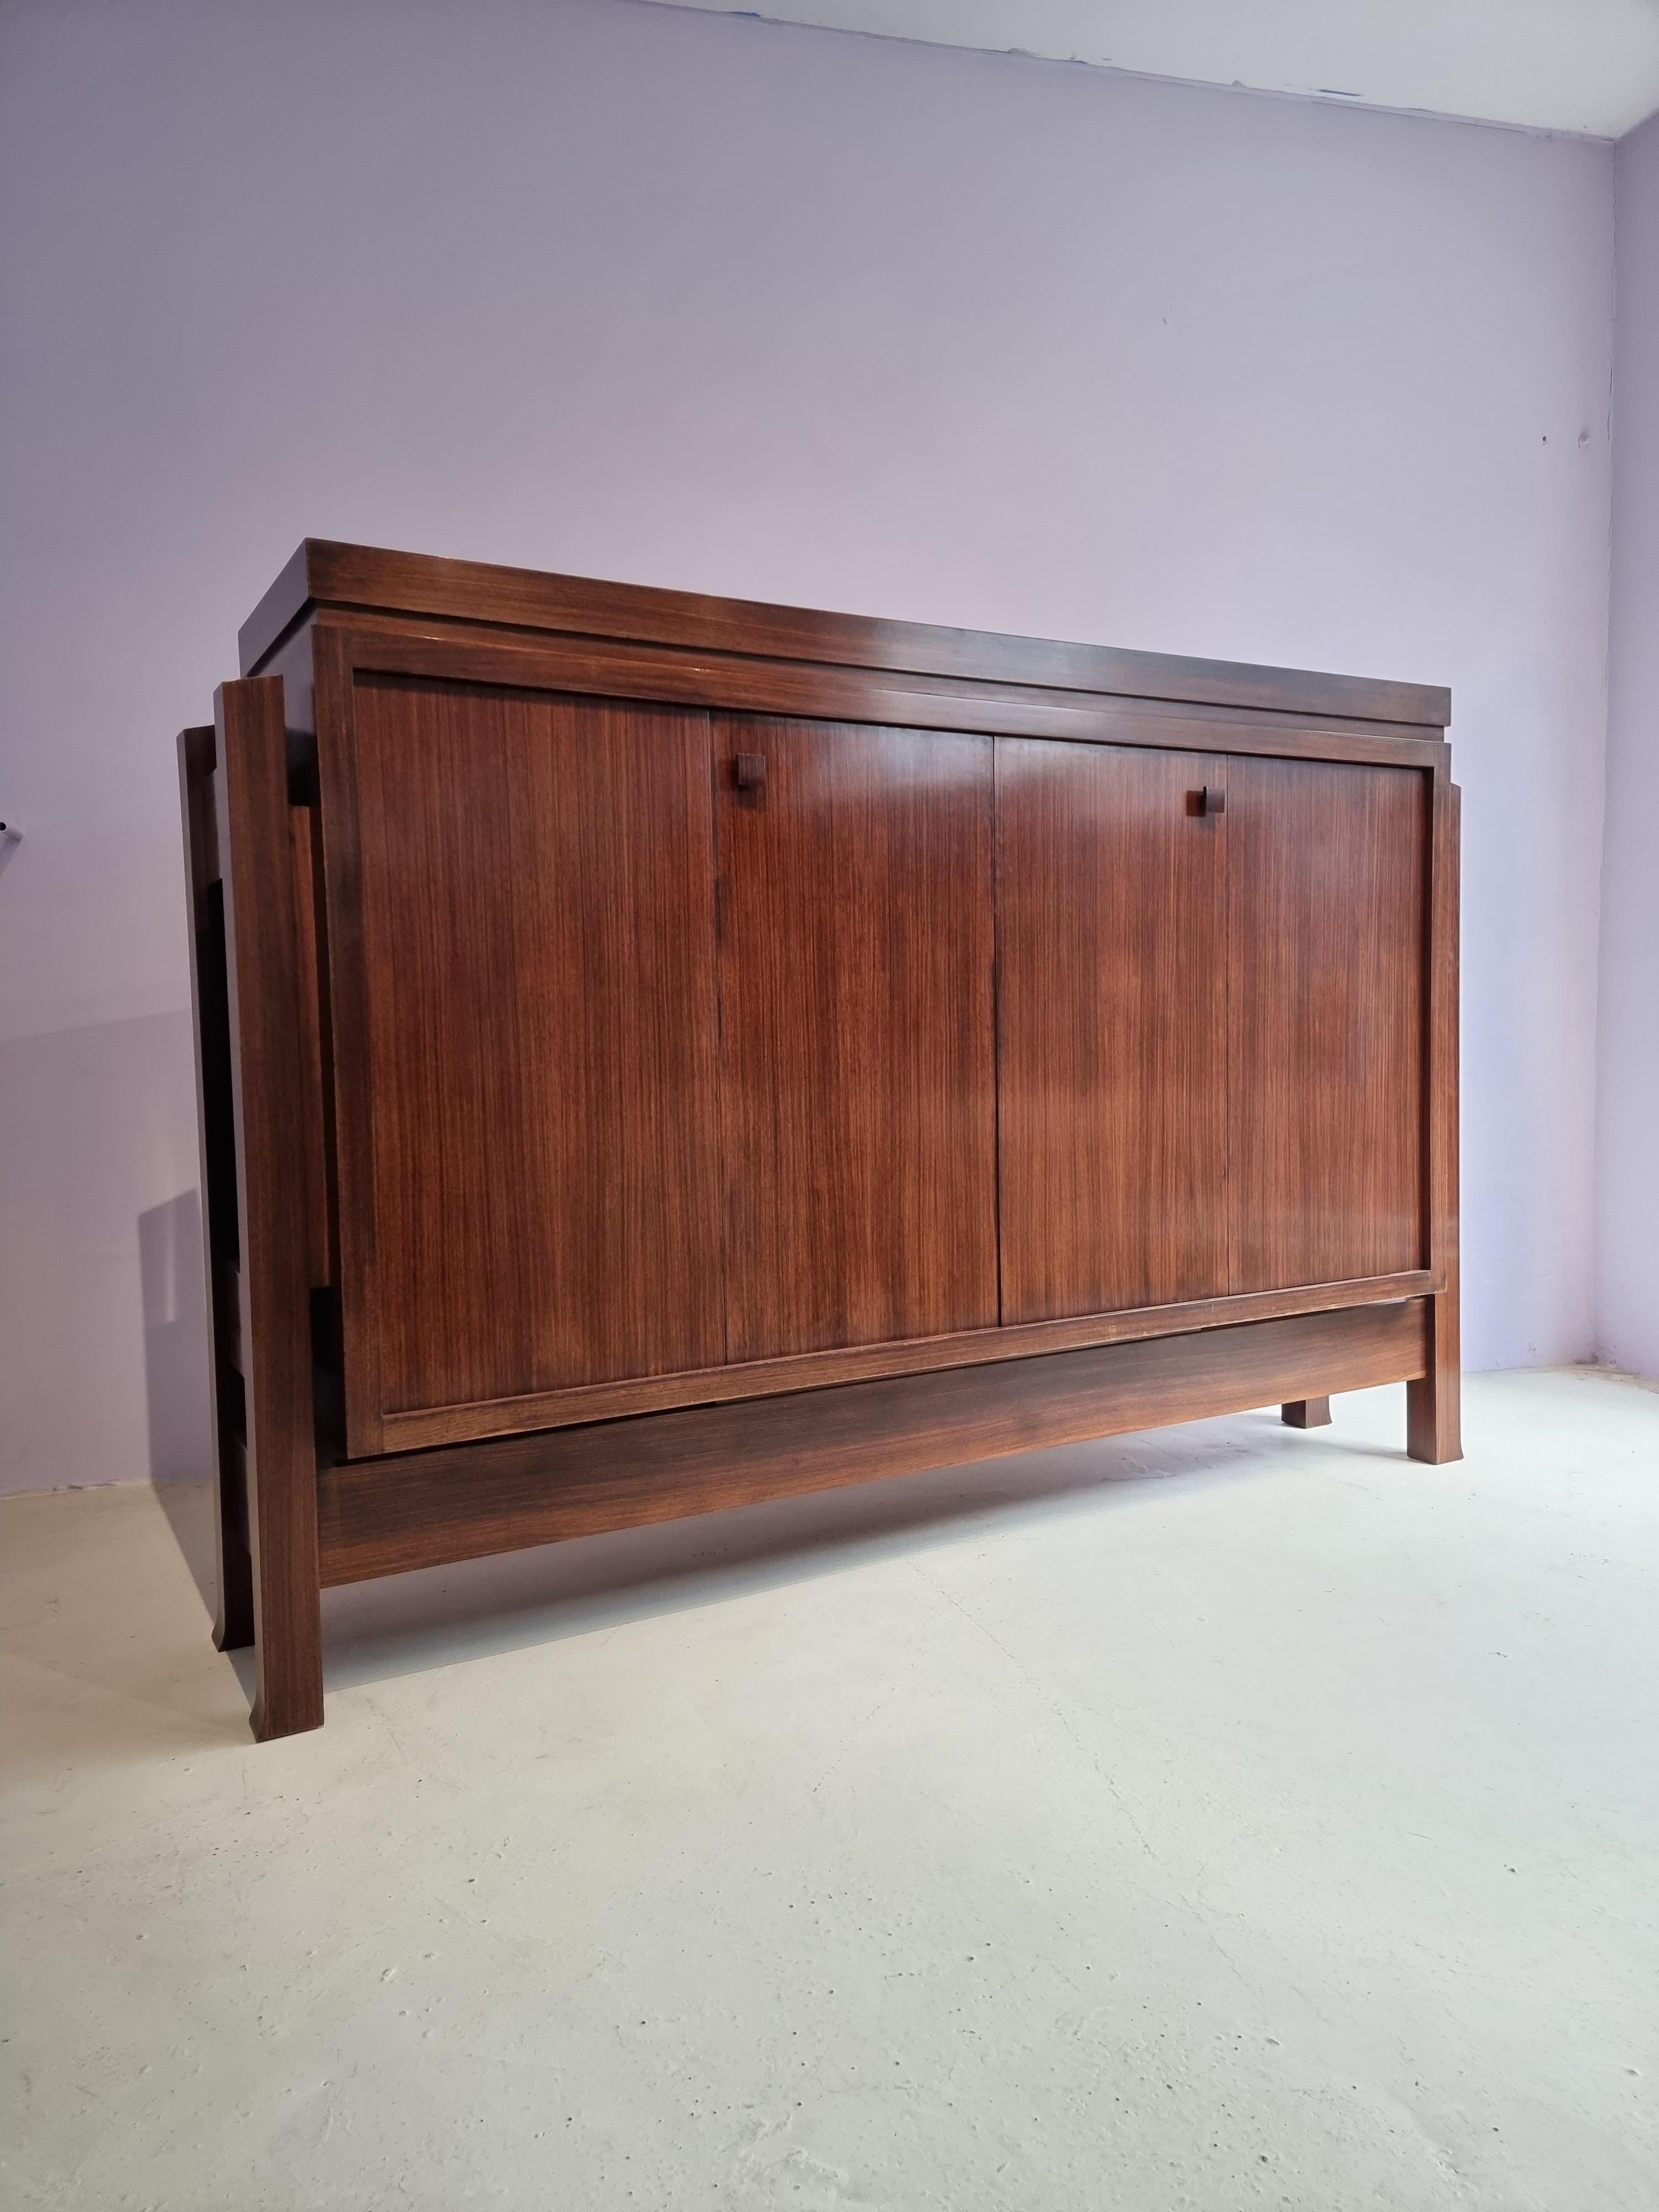 Emiel Veranneman, very rare oak wood, Belgium, 1960s
This monumental highboard cabinet features four doors with squared handles.

The cabinet is geometric and sculptural and at the same time holds plenty of storage space.
On the side of this